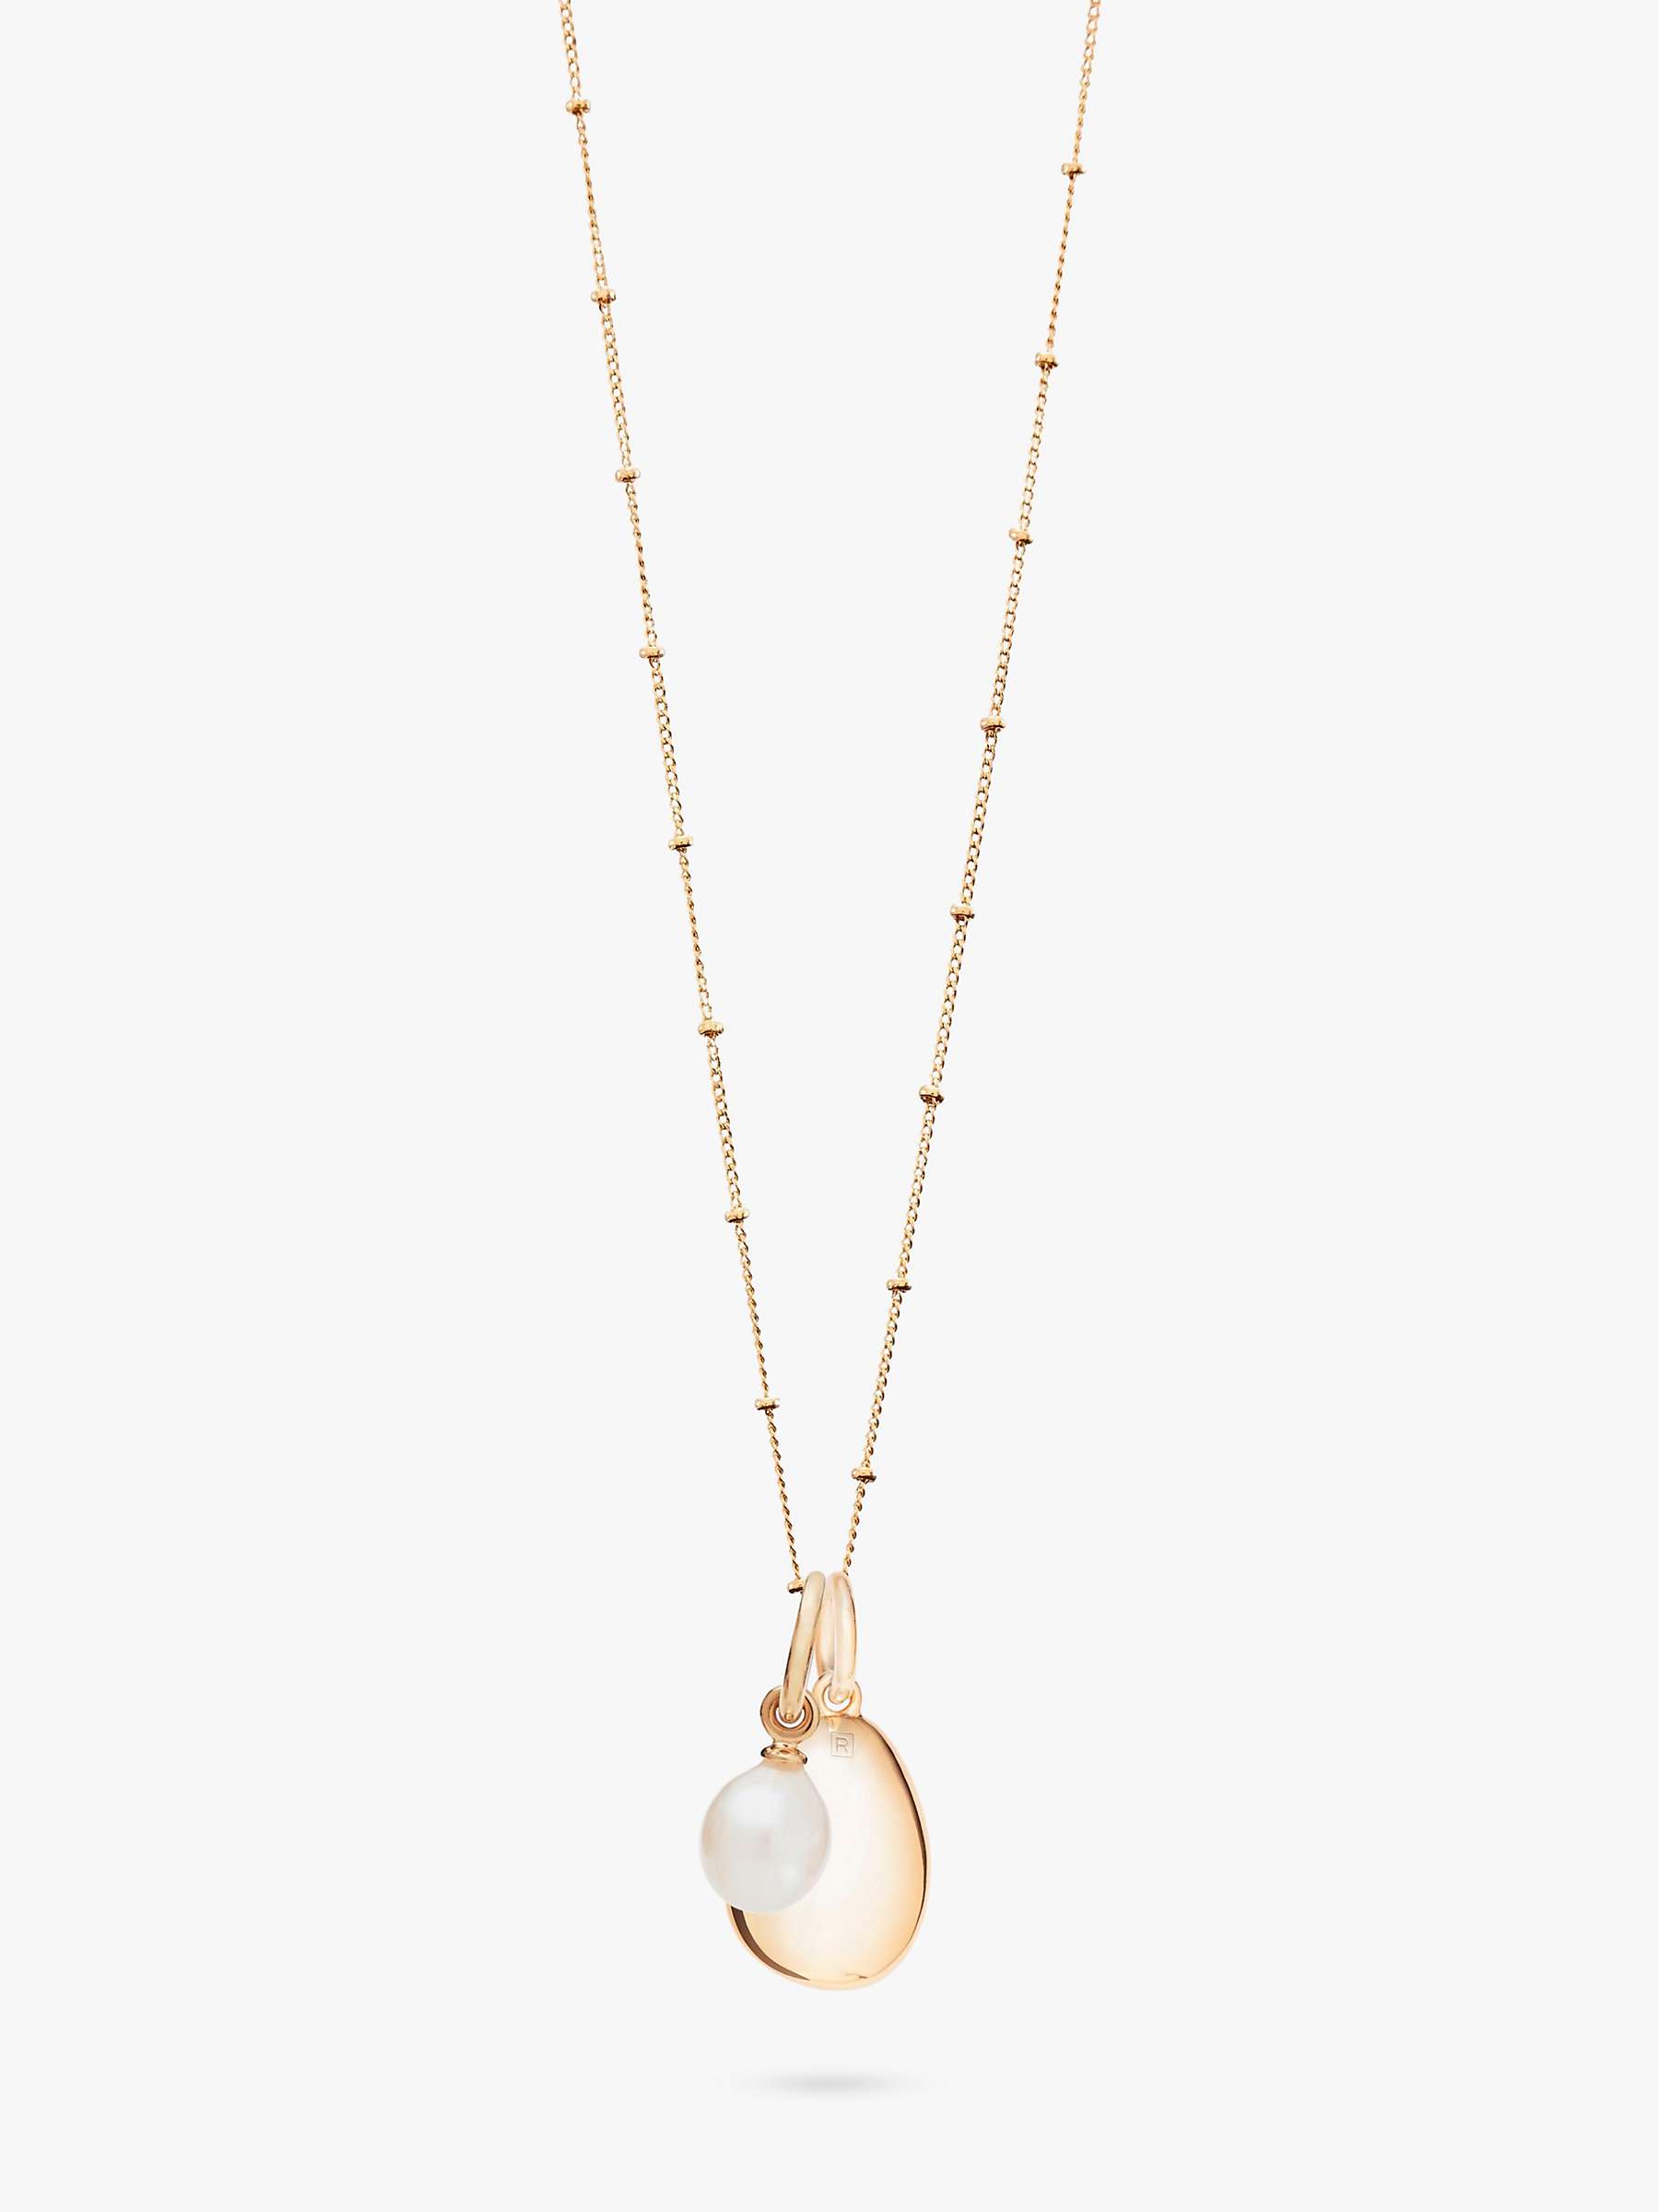 Buy Recognised Pebble Pearl Bobble Chain Necklace Online at johnlewis.com